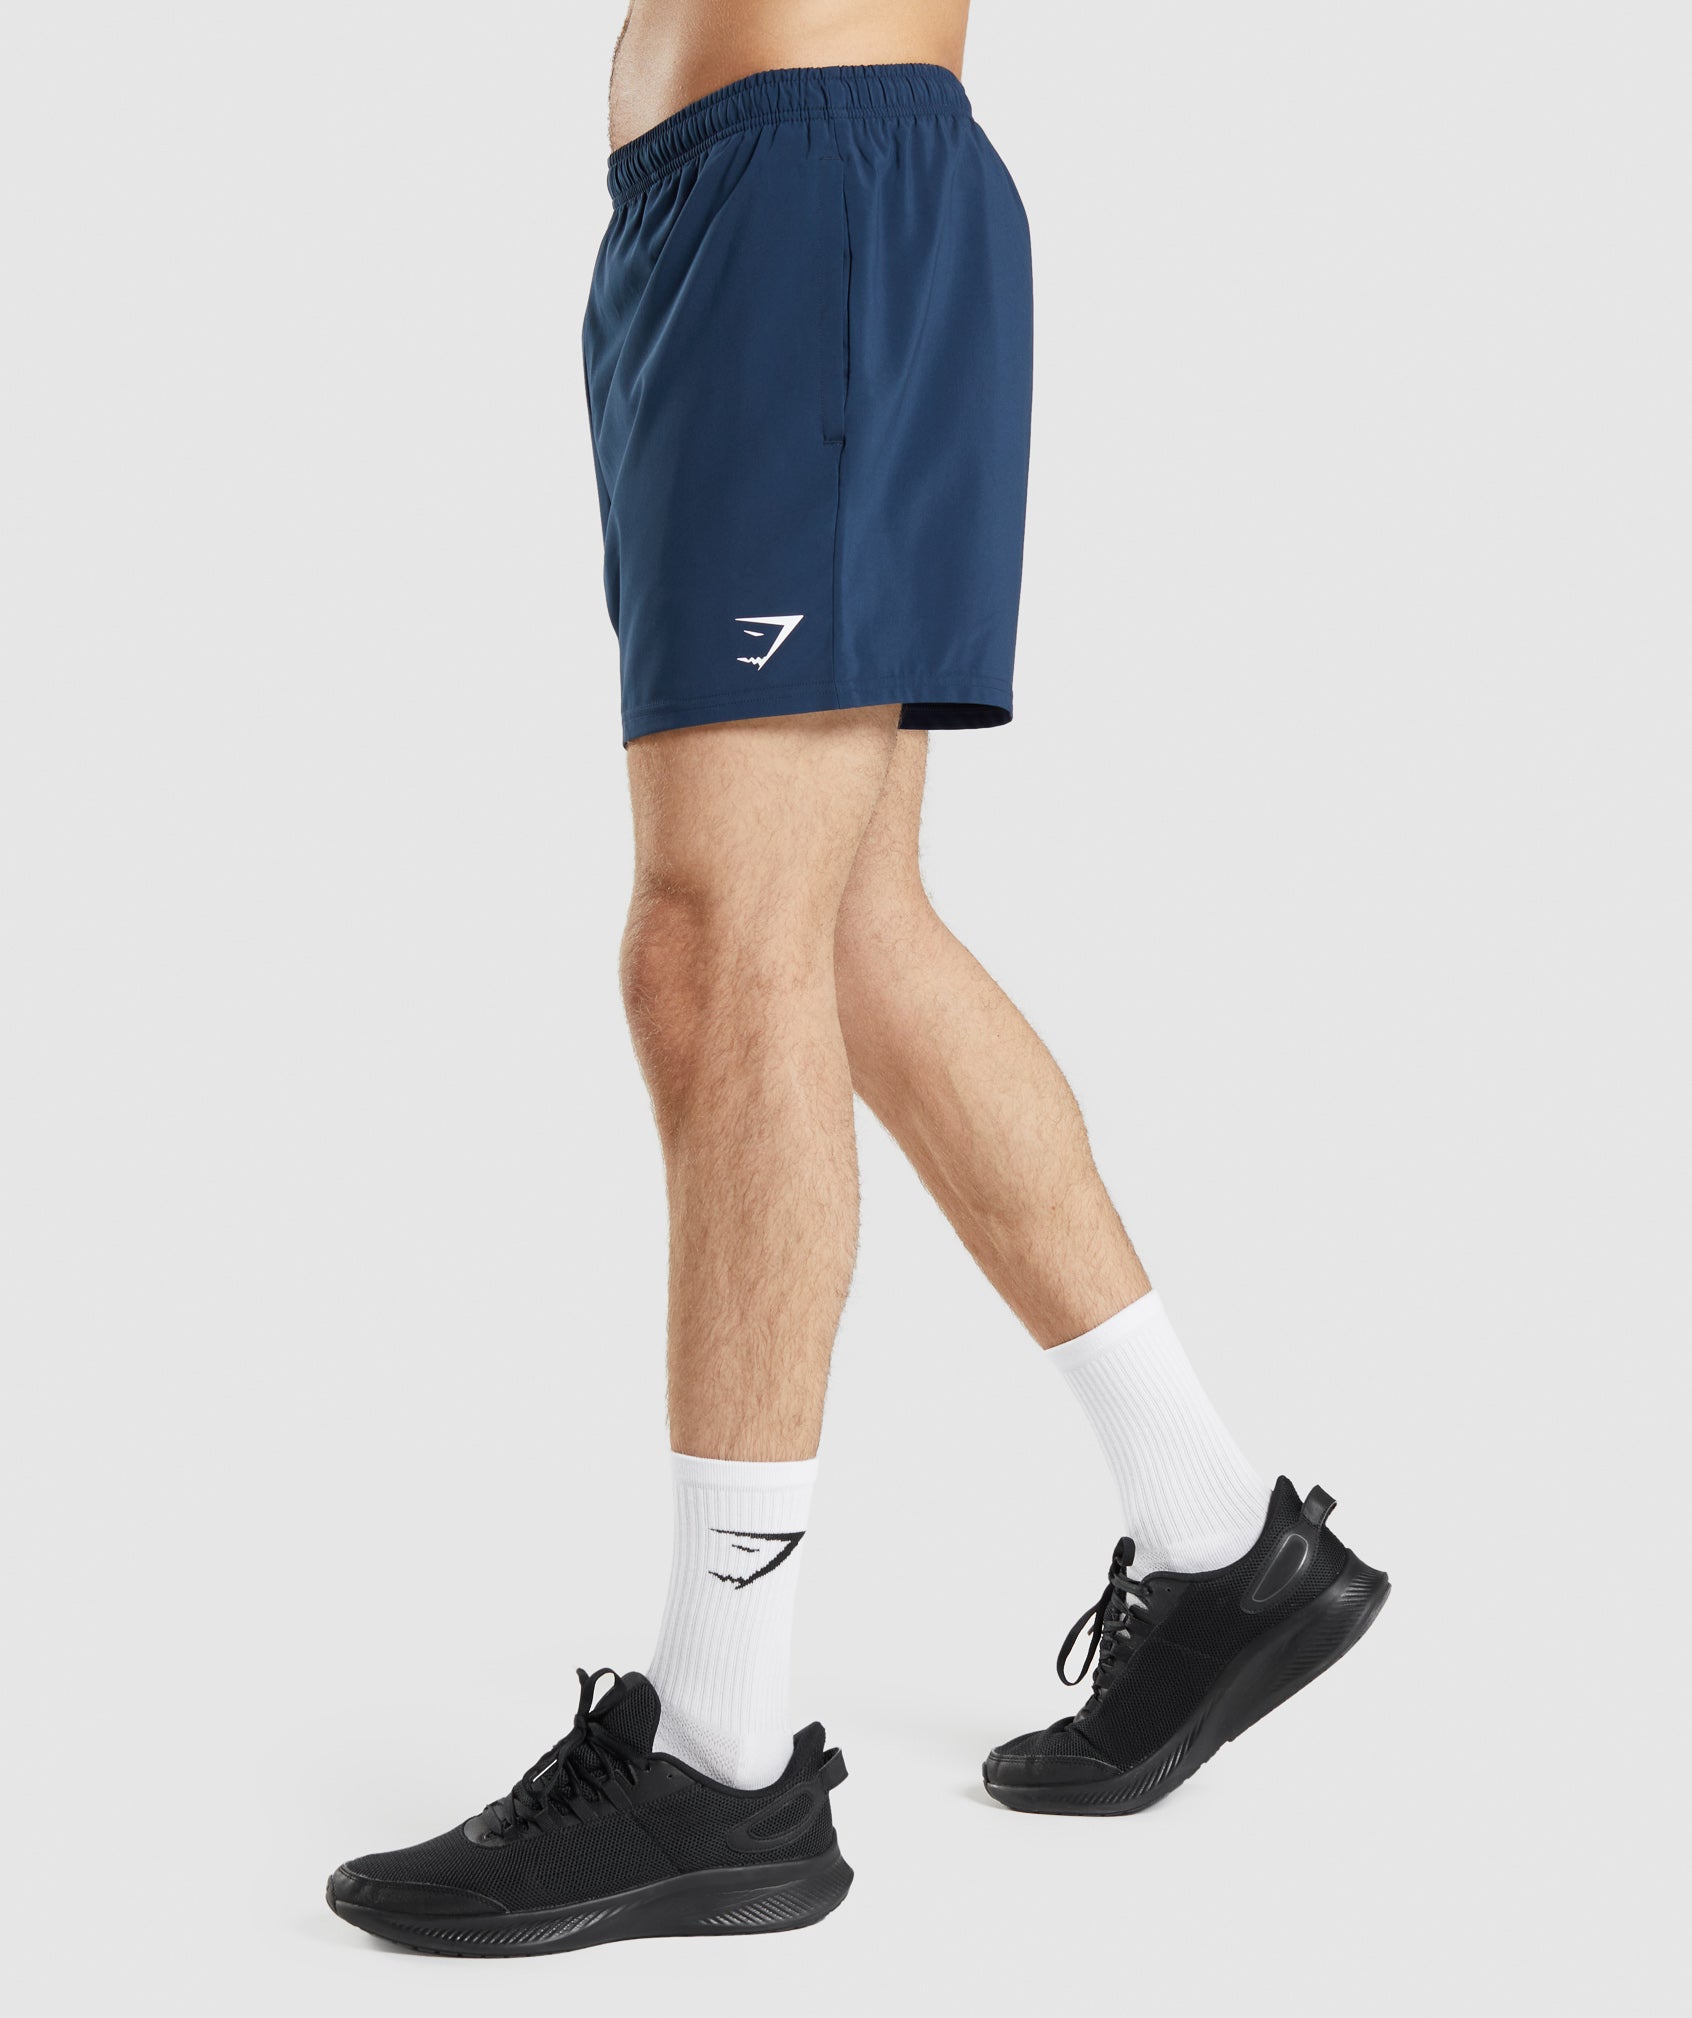 Arrival 5" Shorts in Navy - view 3